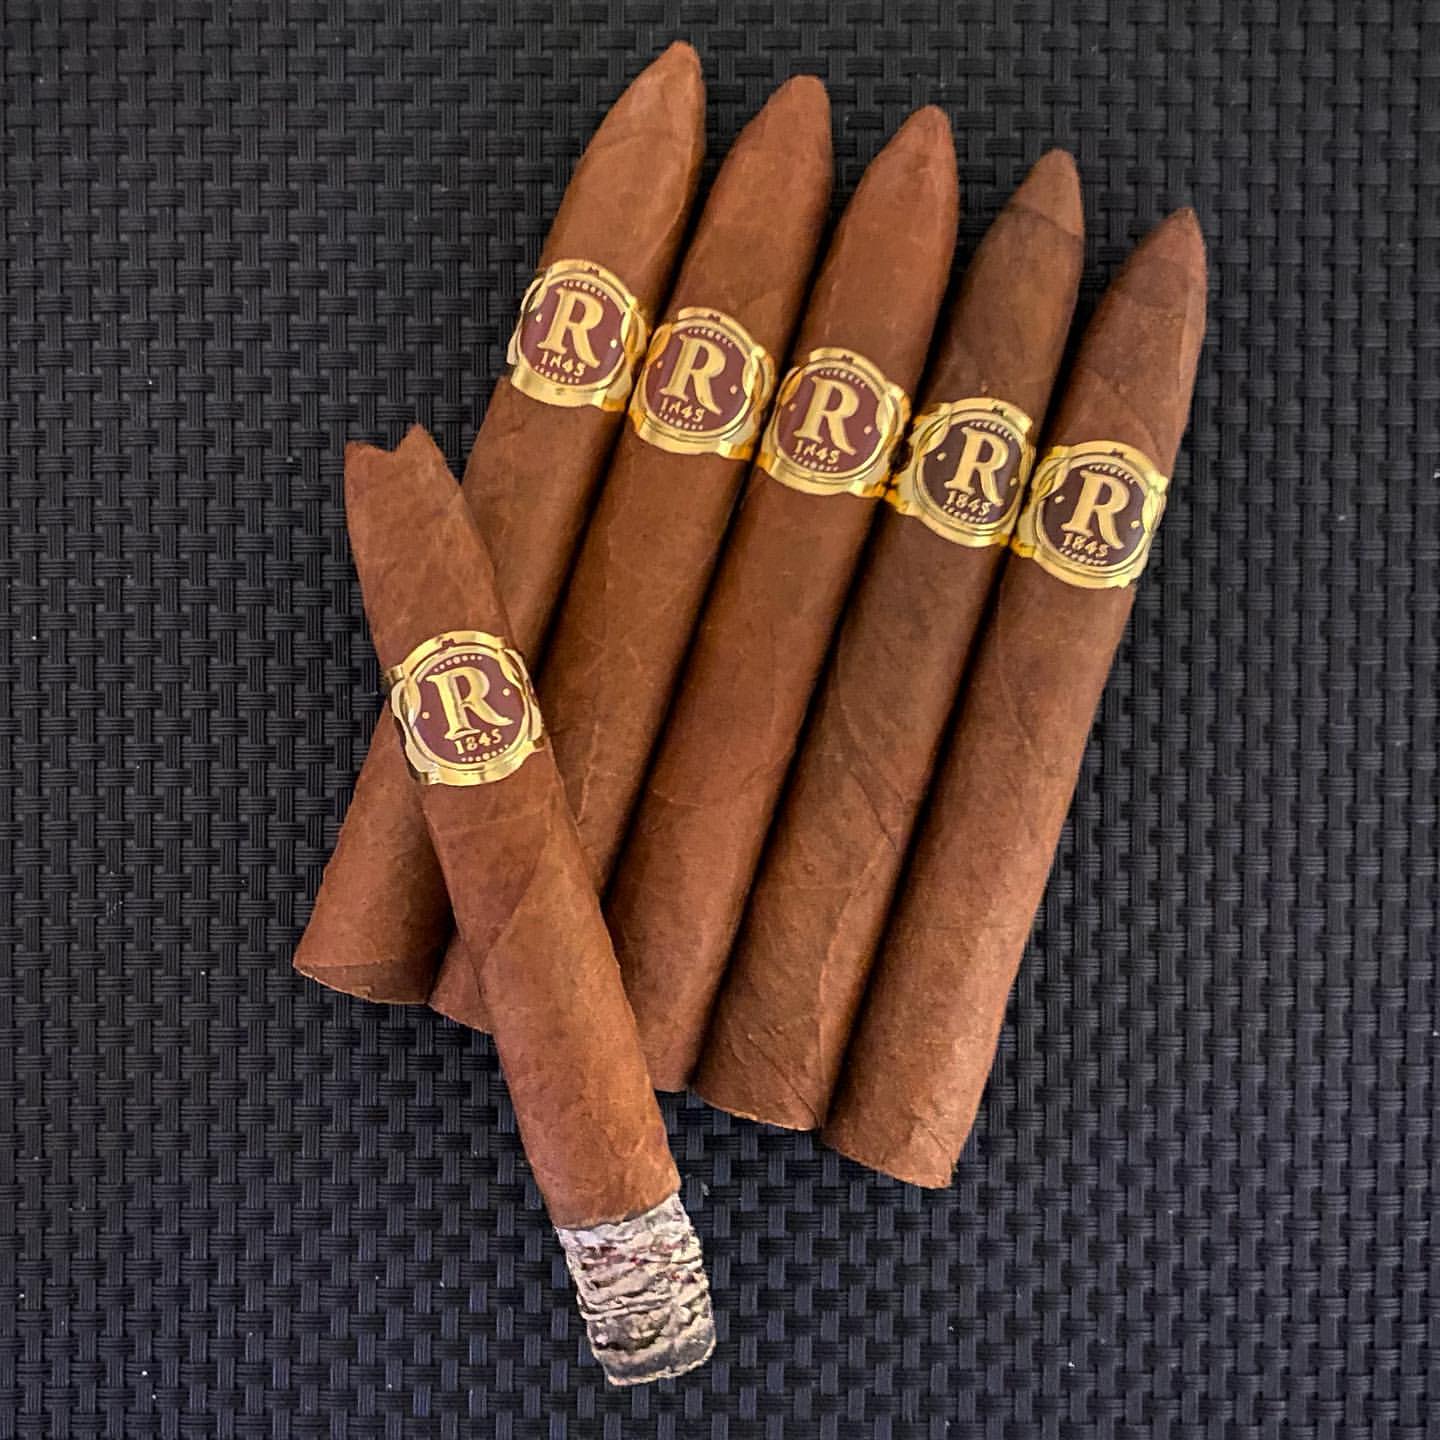 Essential Tips for Storing Cigars Properly